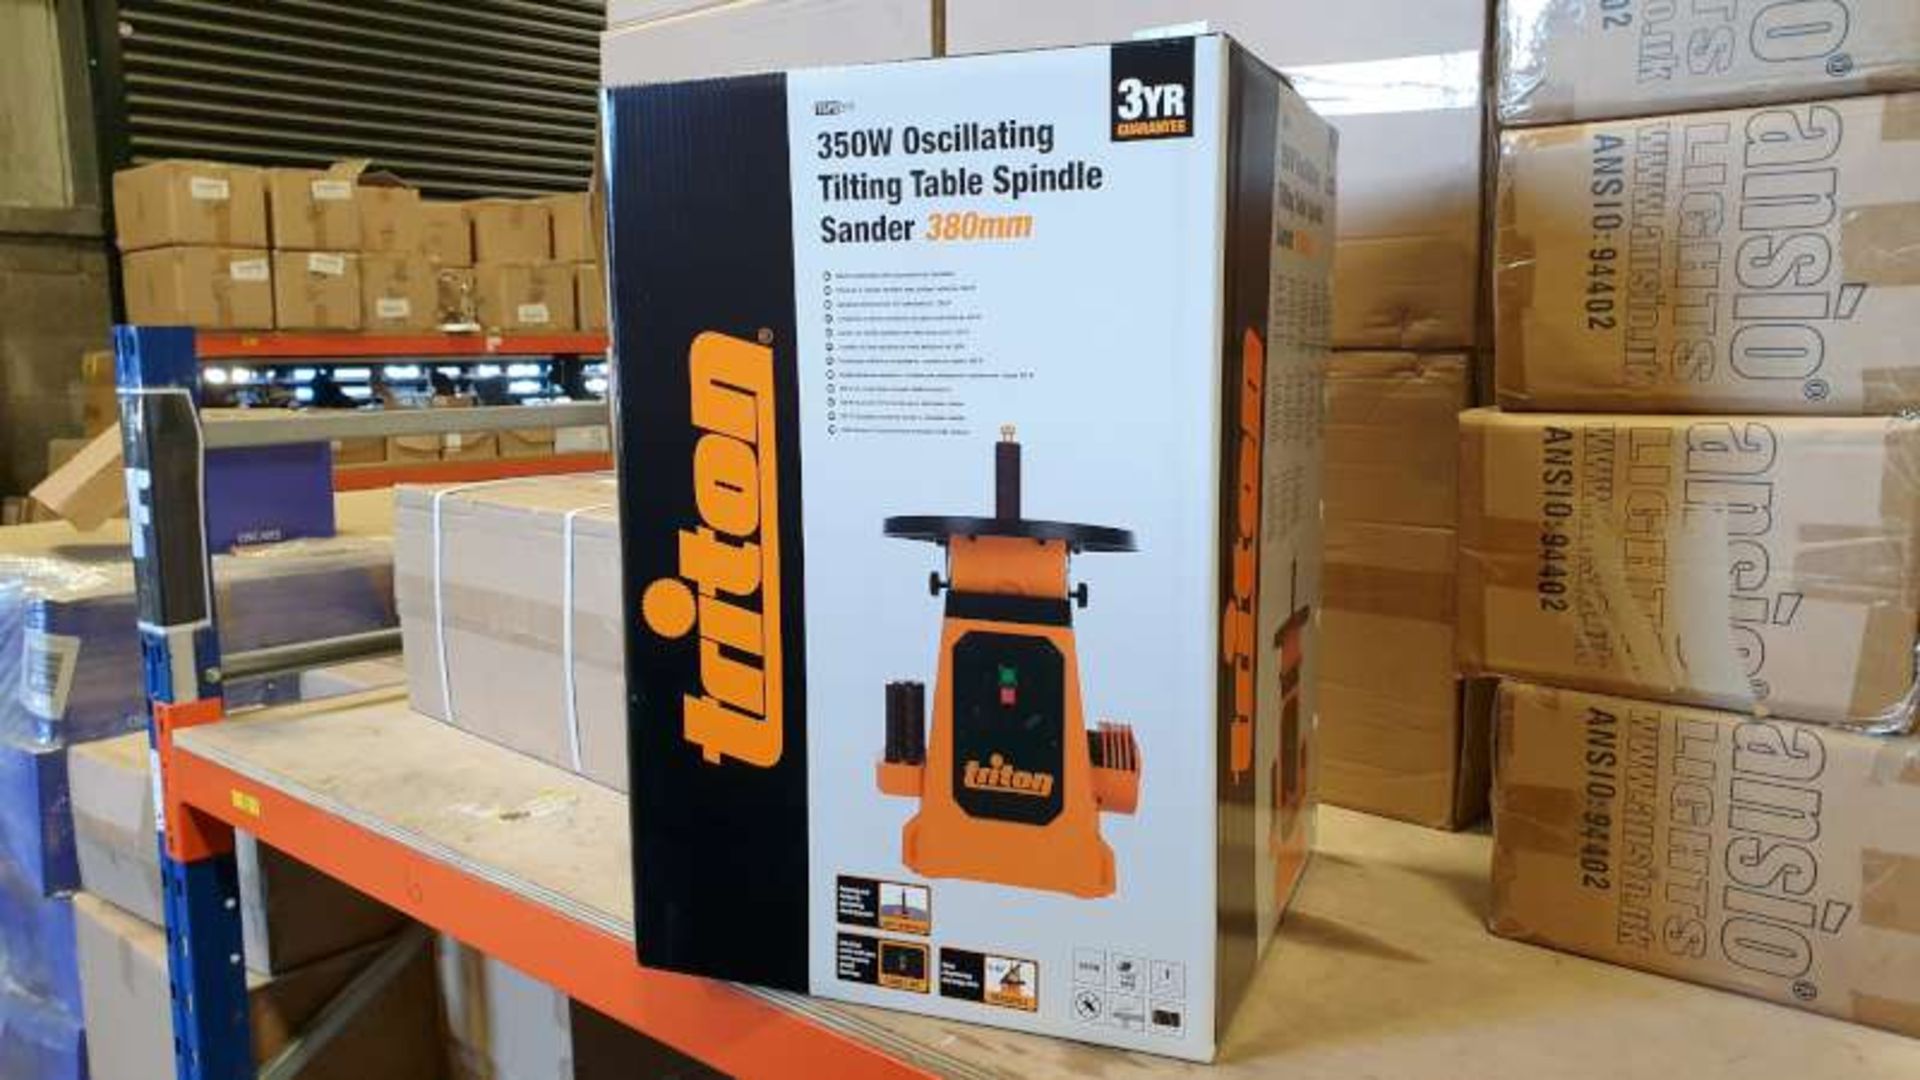 BRAND NEW BOXED TRITON 350W OSCILLATING TILTING TABLE SPINDLE SANDER 380MM WITH 3 YEARS MANUFACTURES